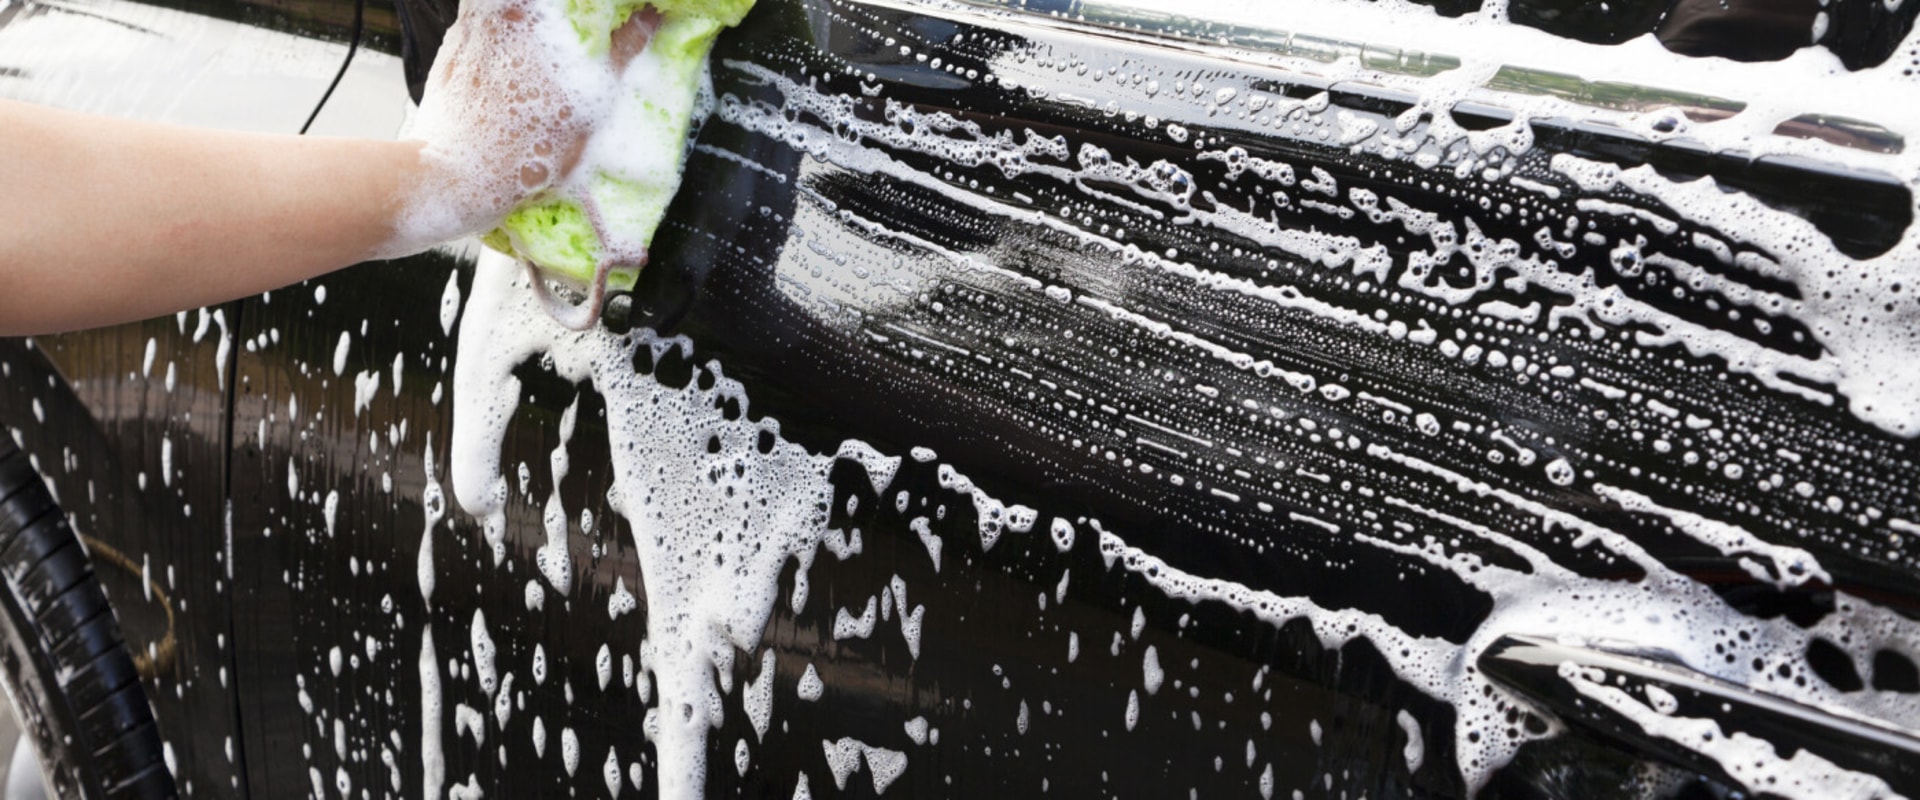 Is it better to wash car by hand or automatic car wash?